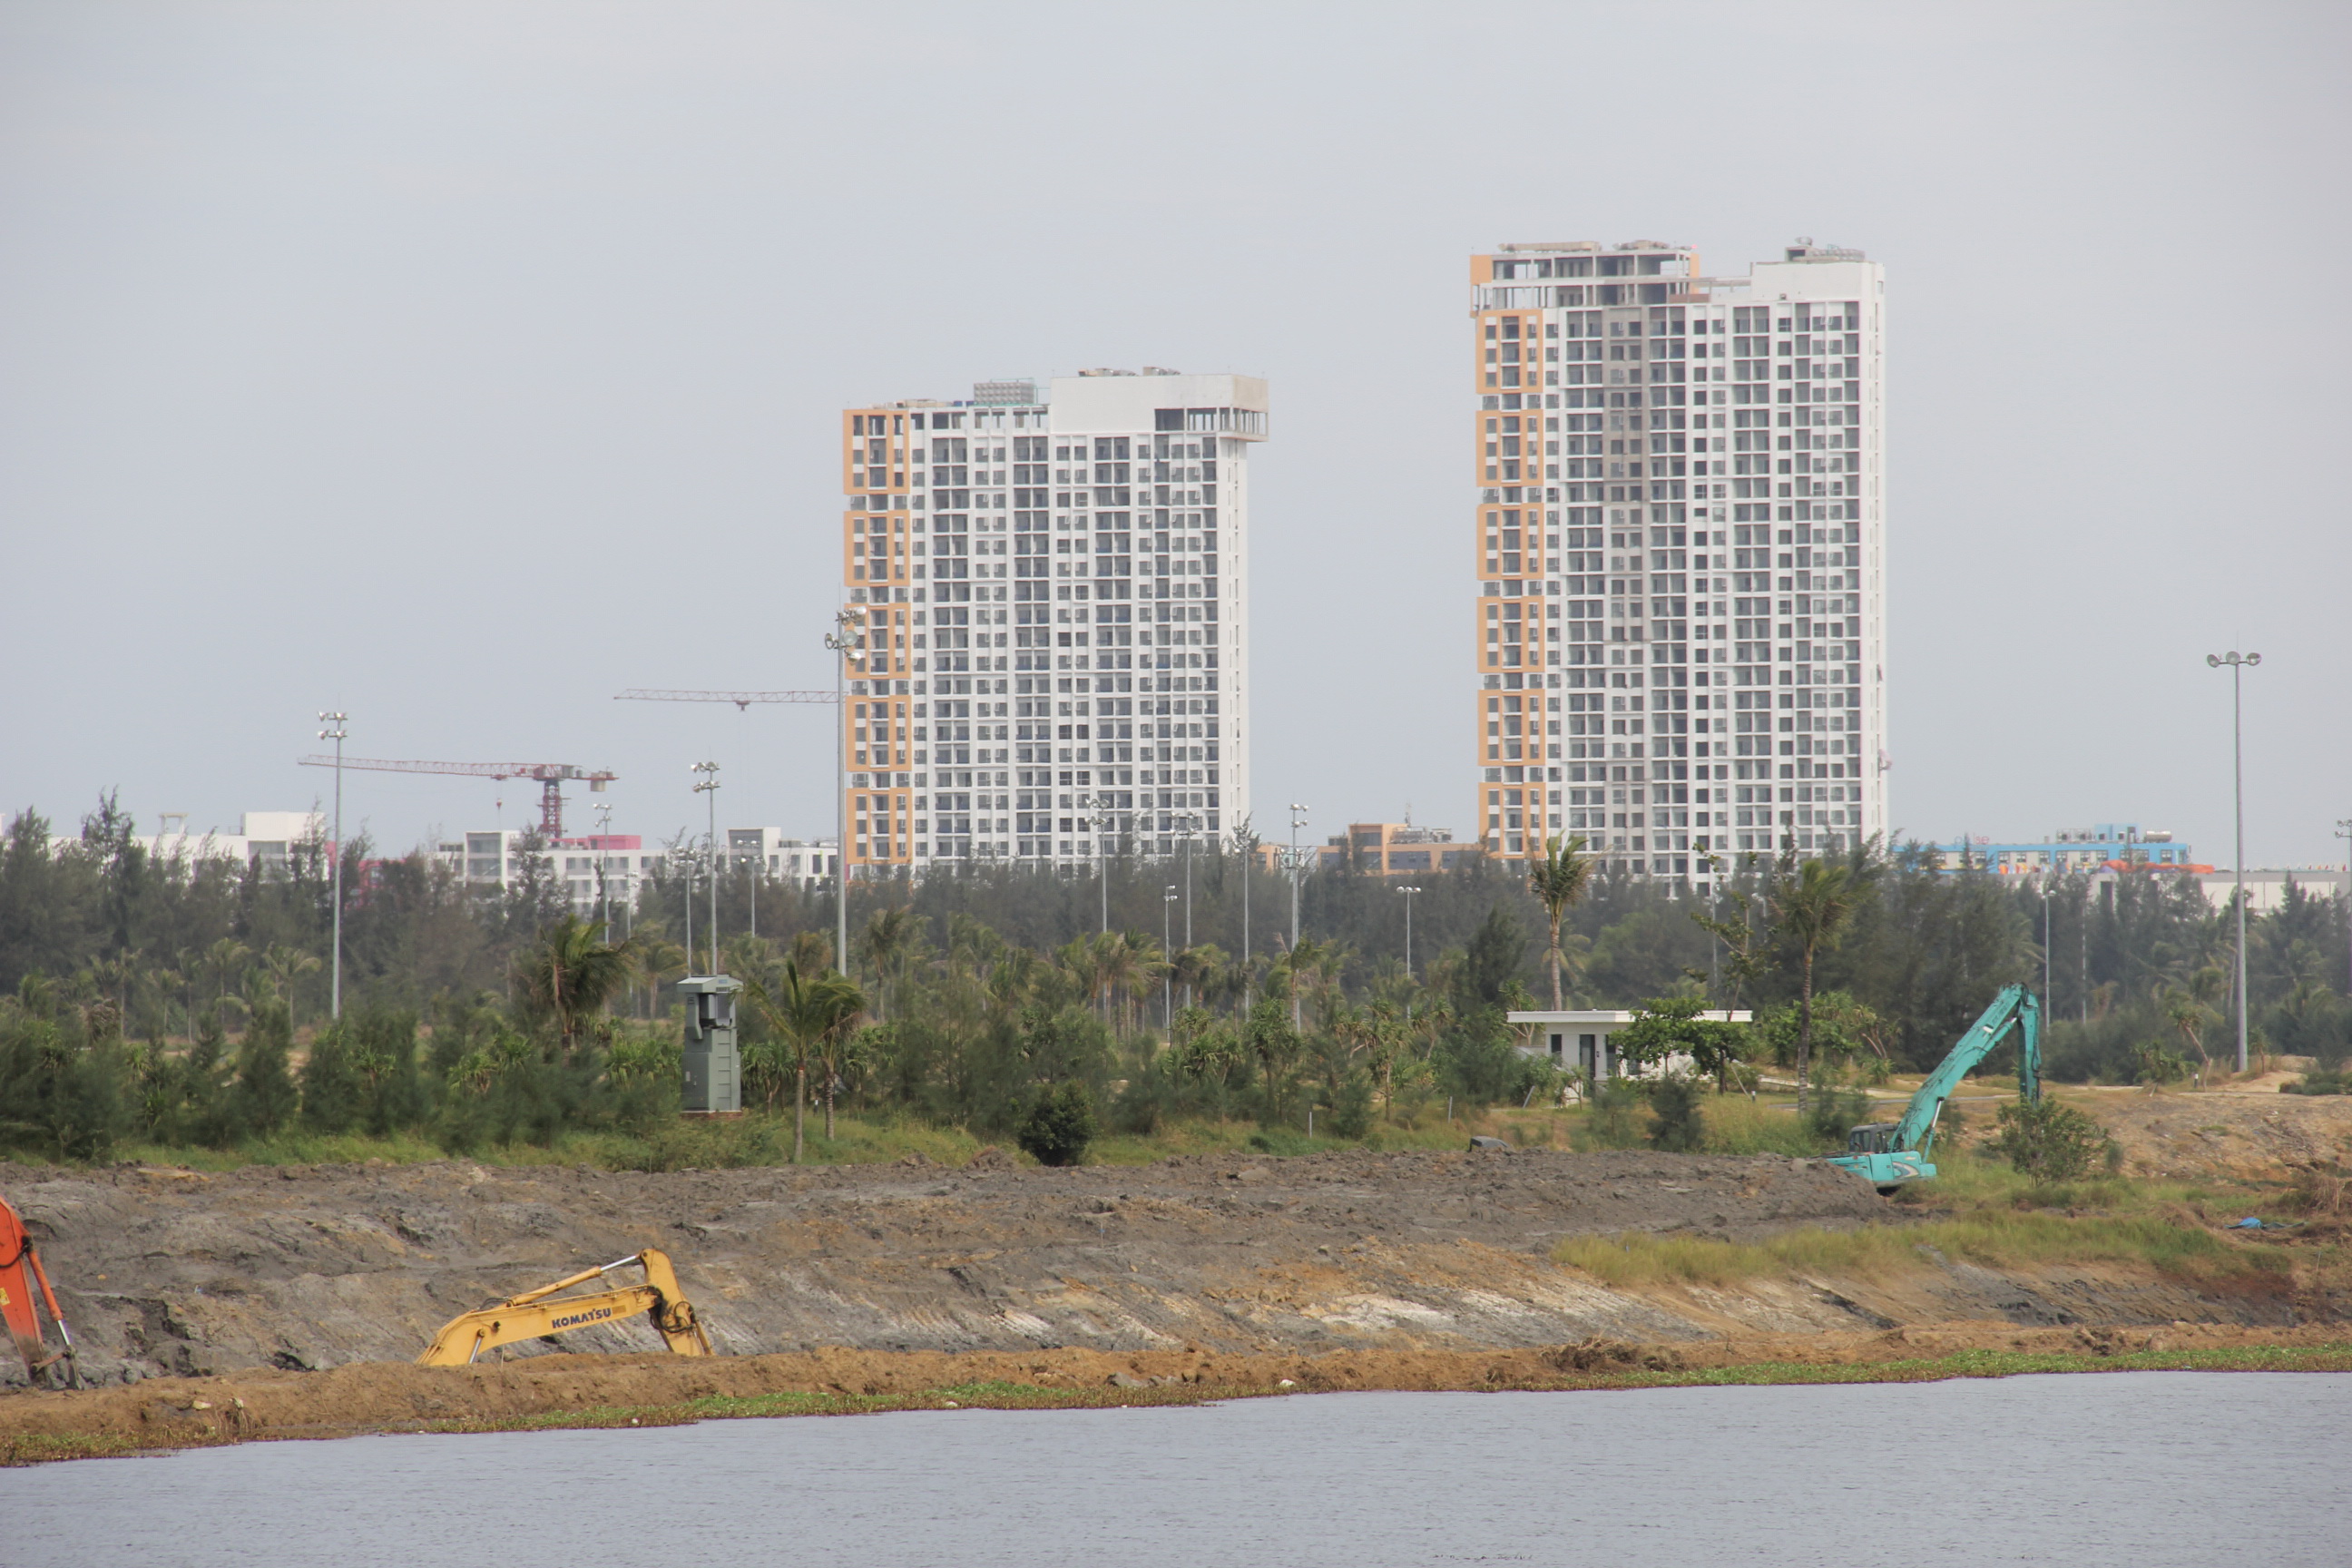 The owner of The Empire, or Cocobay, project in Ngu Hanh Son District, Da Nang City seeks to convert a part into an apartment building. Photo: Truong Trung / Tuoi Tre